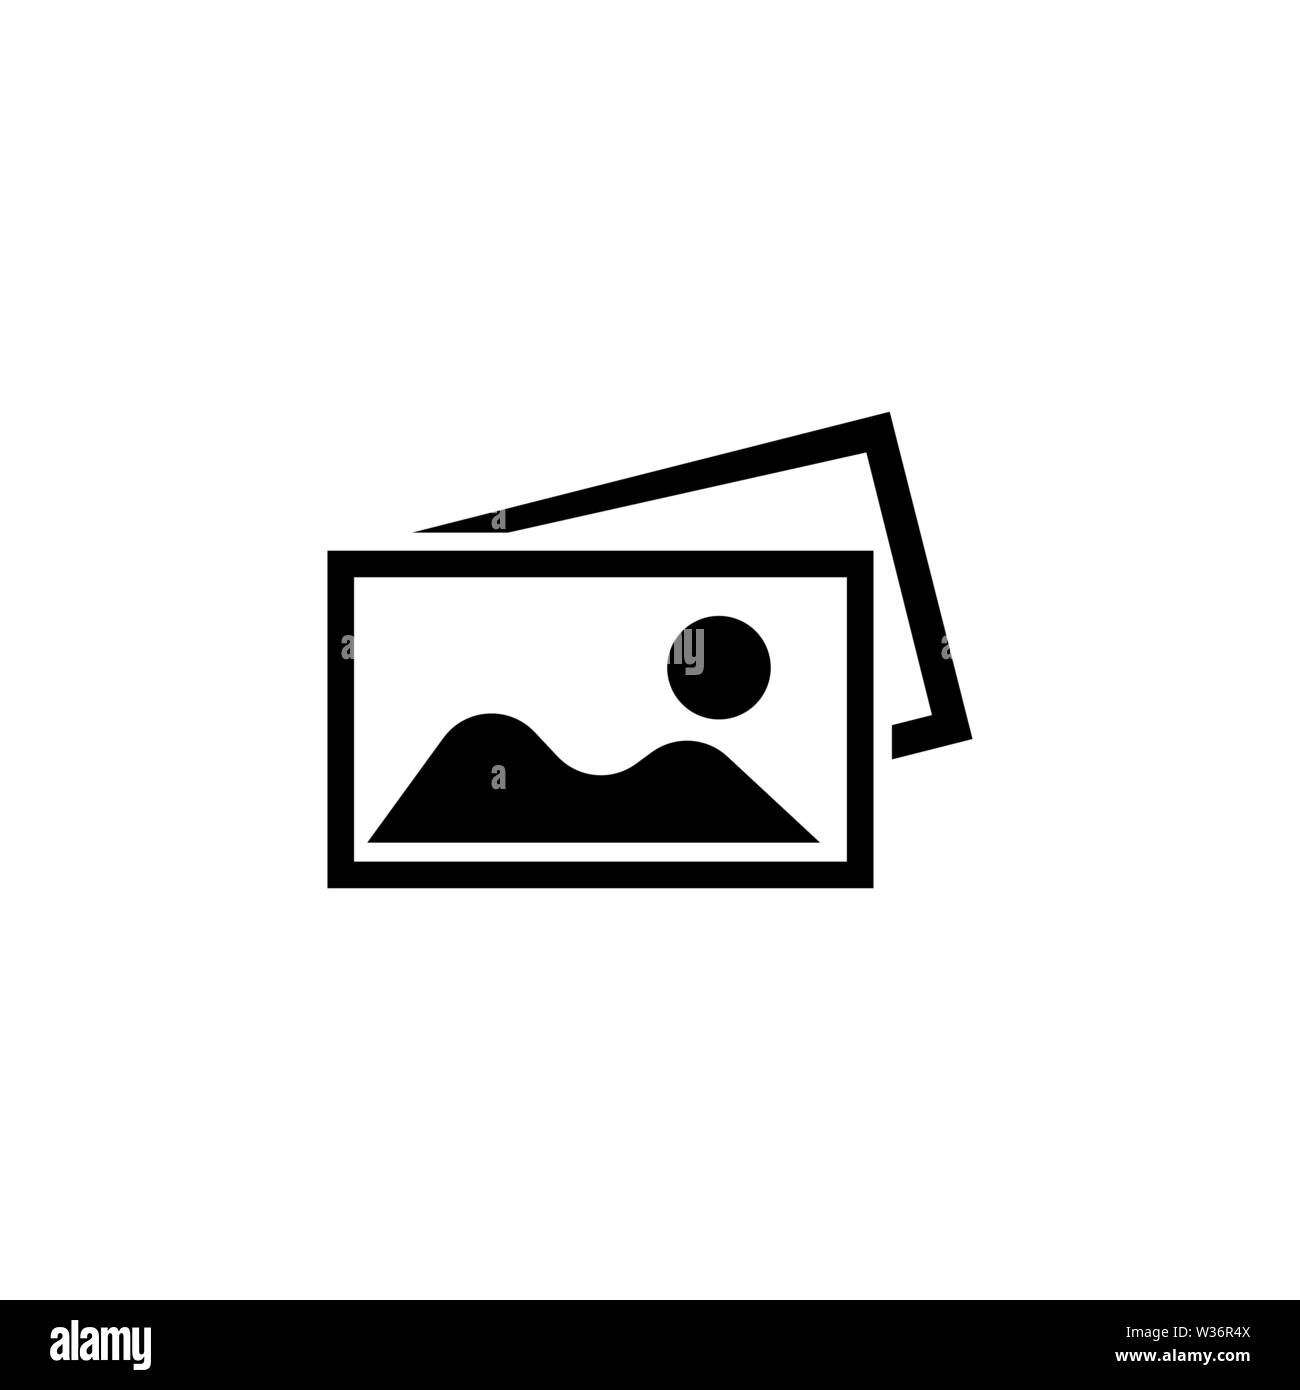 Mountain Picture. Flat Vector Icon illustration. Simple black symbol on white background. Mountain Picture sign design template for web and mobile UI Stock Vector